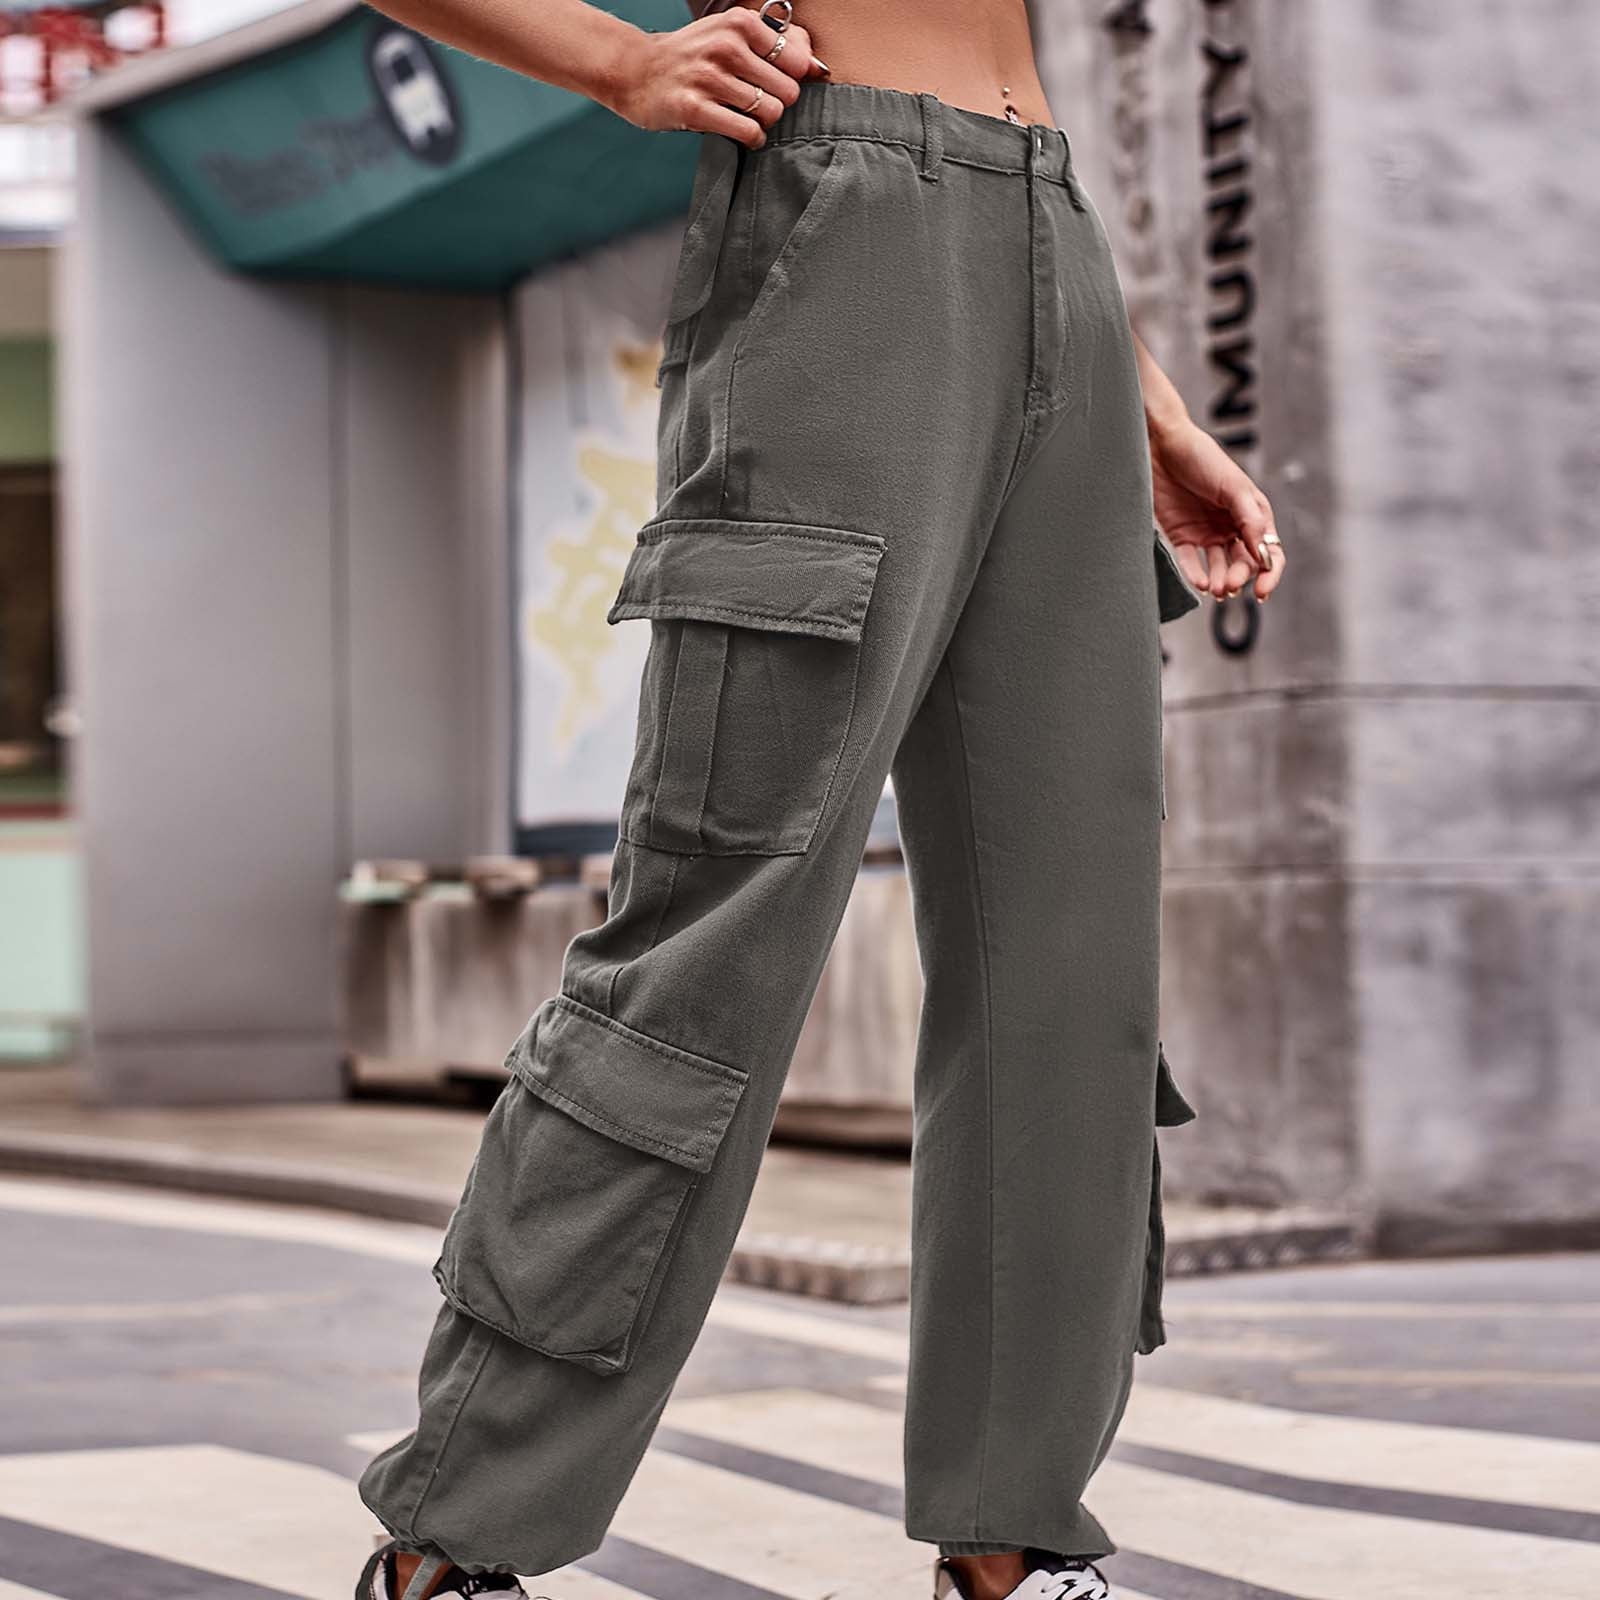 Gaecuw Cargo Pants Women High Waist Jeans Relaxed Fit Long Button Up Lounge Trousers Casual Loose Baggy Mid Waisted Denim Summer Ankle Length Pockets 64e169a8 5943 4fe9 805d 8780c19a36e9.53c80955dc98f2c5c28febdbf0a6258e